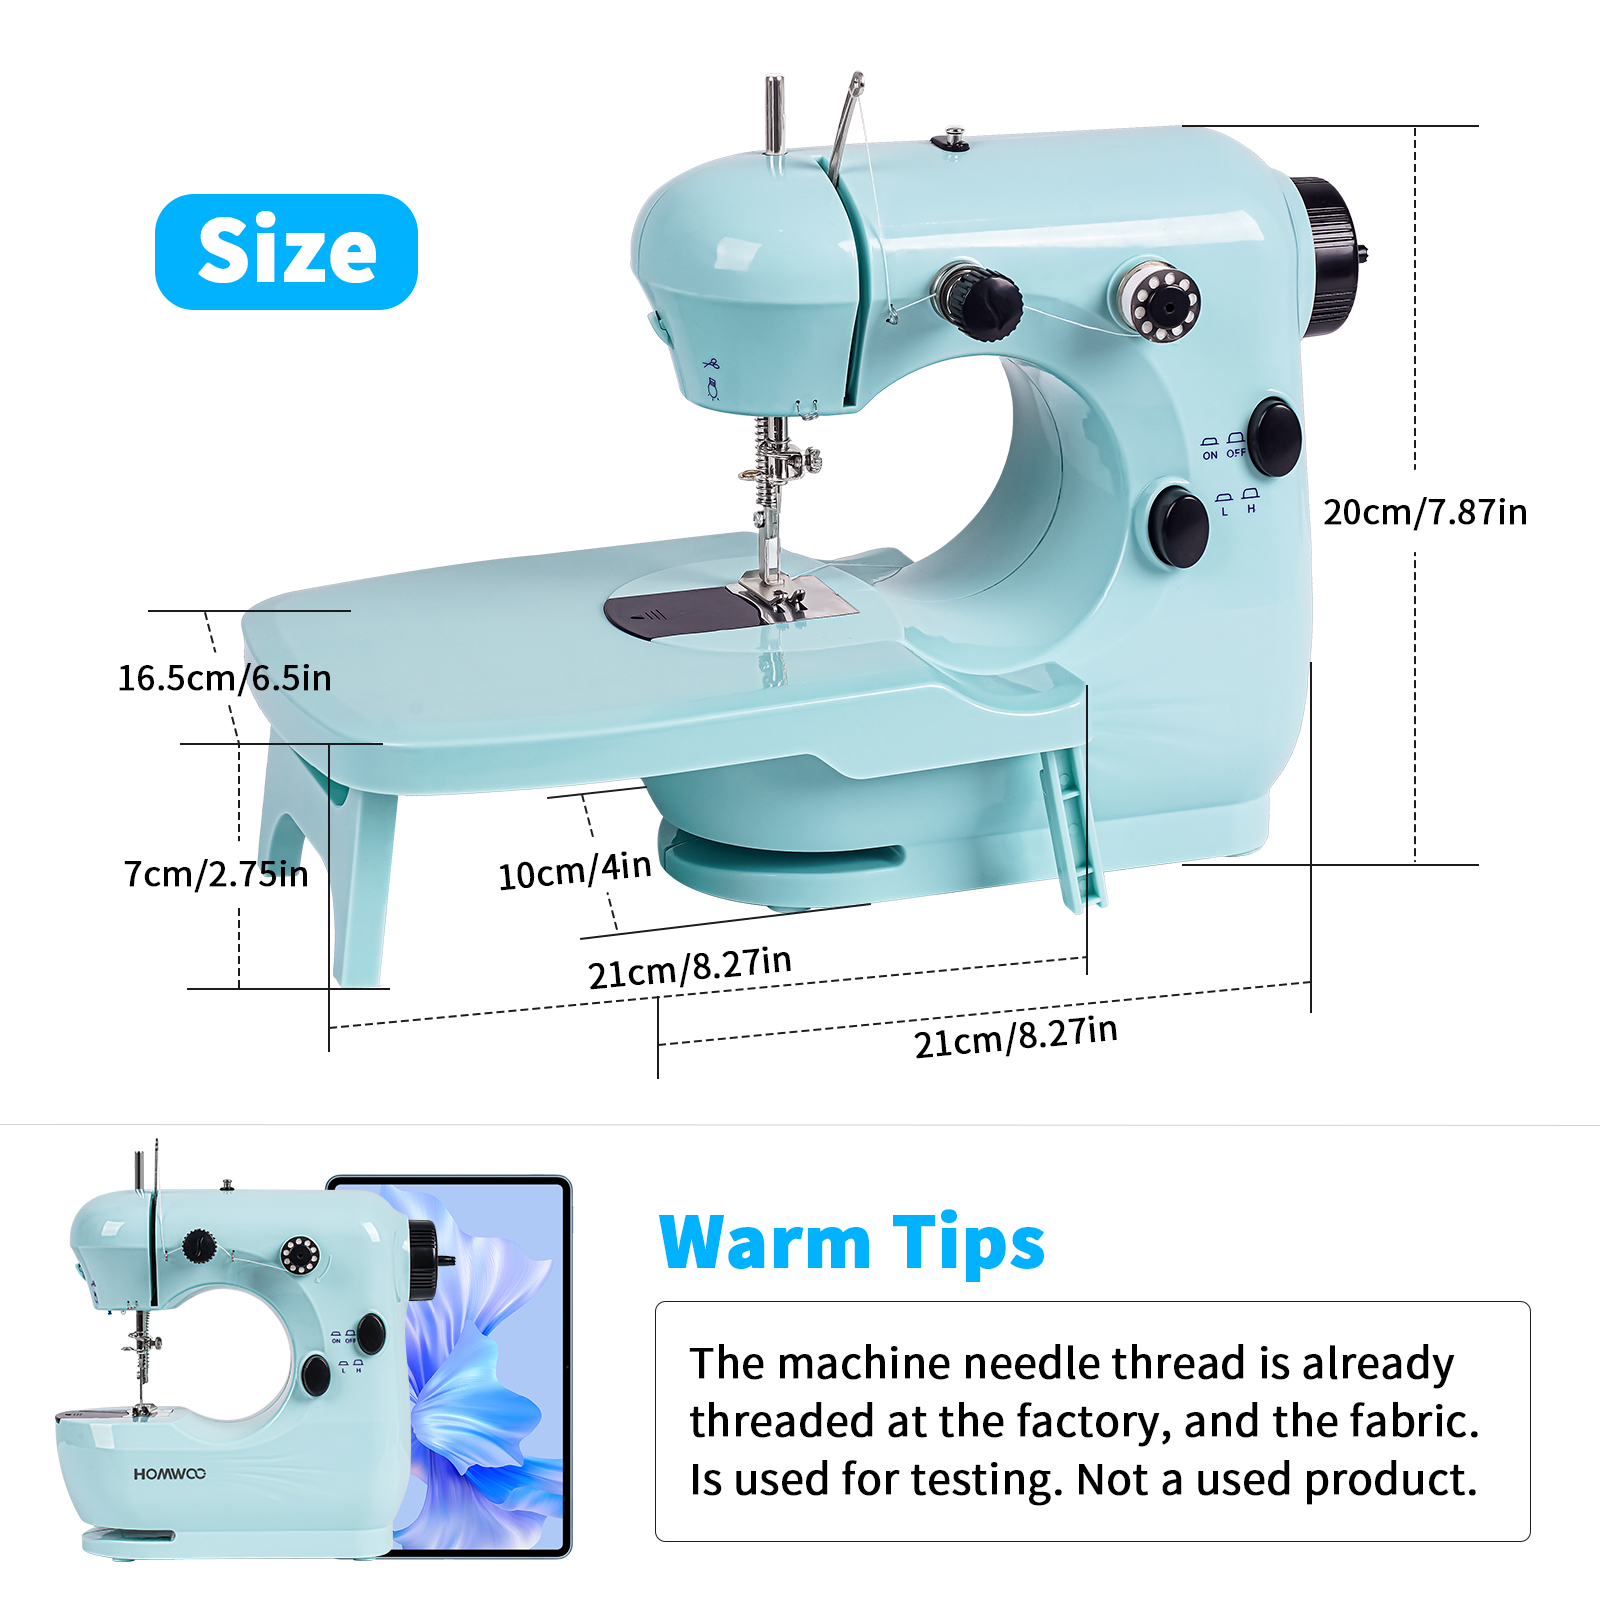 HOMWOO Mini Sewing Machine for Beginner, Dual Speed Portable Sewing Machine with Extension Table, Stitch, Sewing Kit for Household, Mother's Day Gifts - image 4 of 7